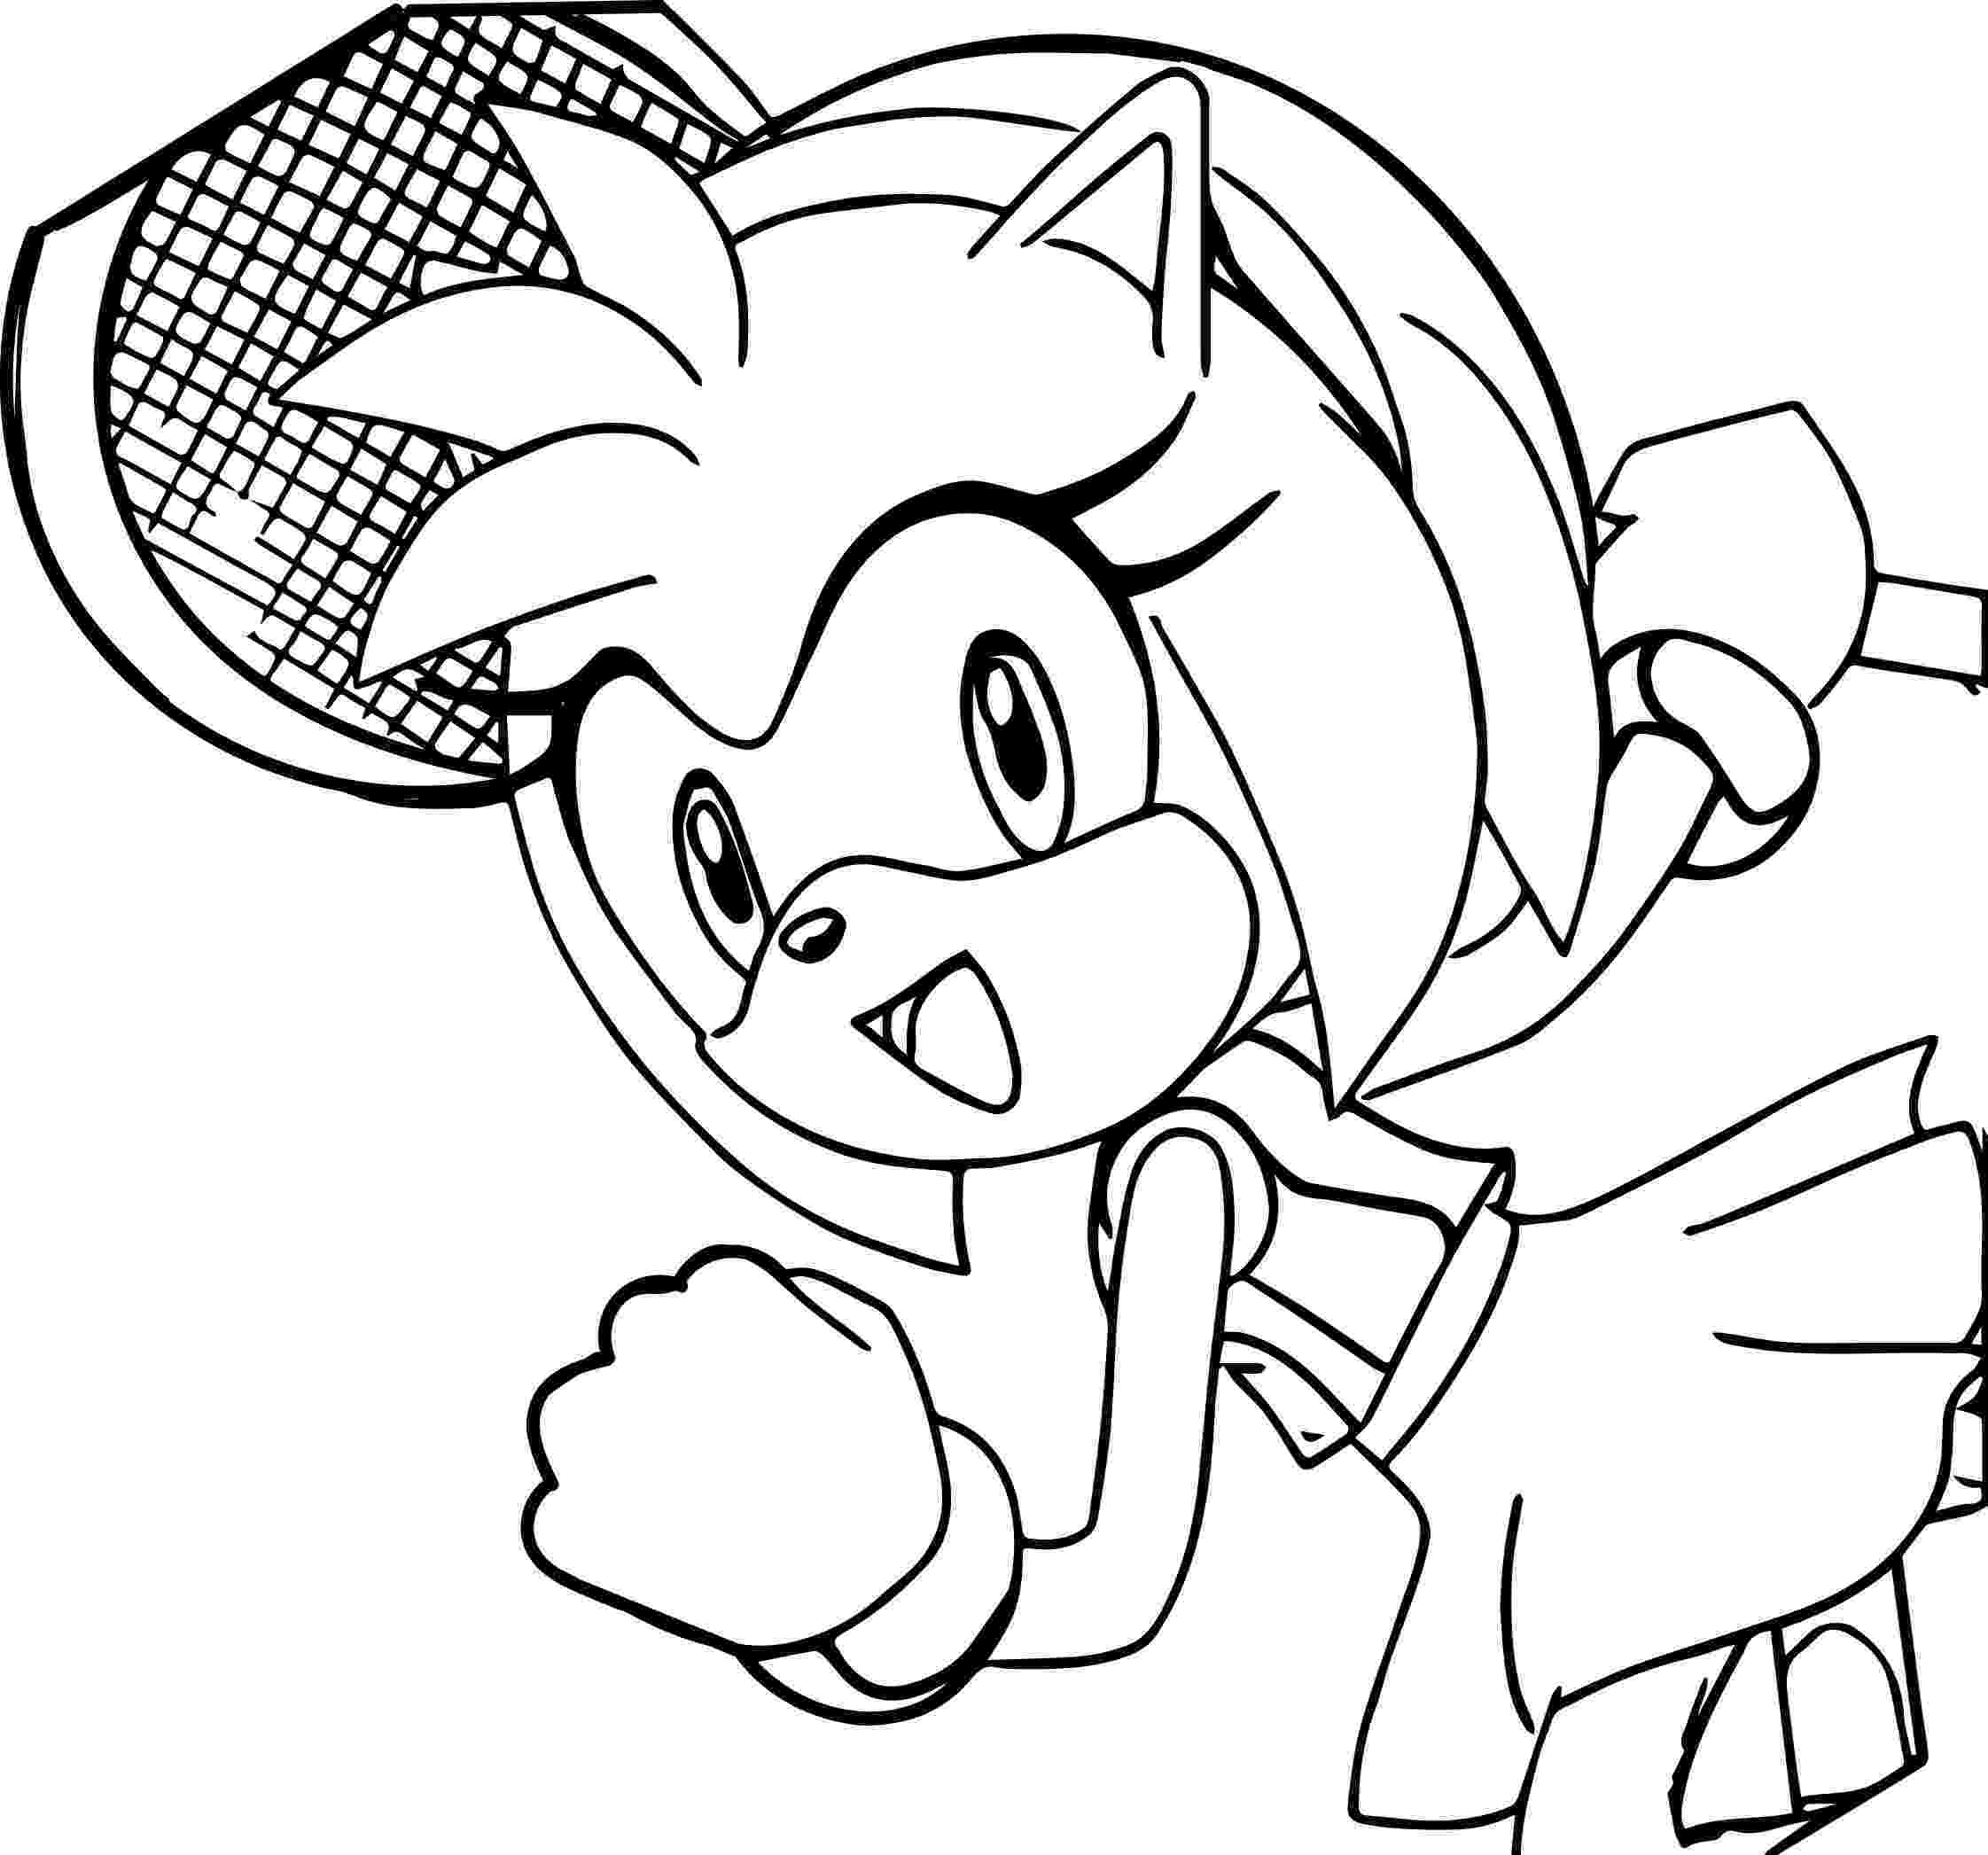 amy rose coloring pages amy rose my hair coloring page wecoloringpagecom rose amy pages coloring 